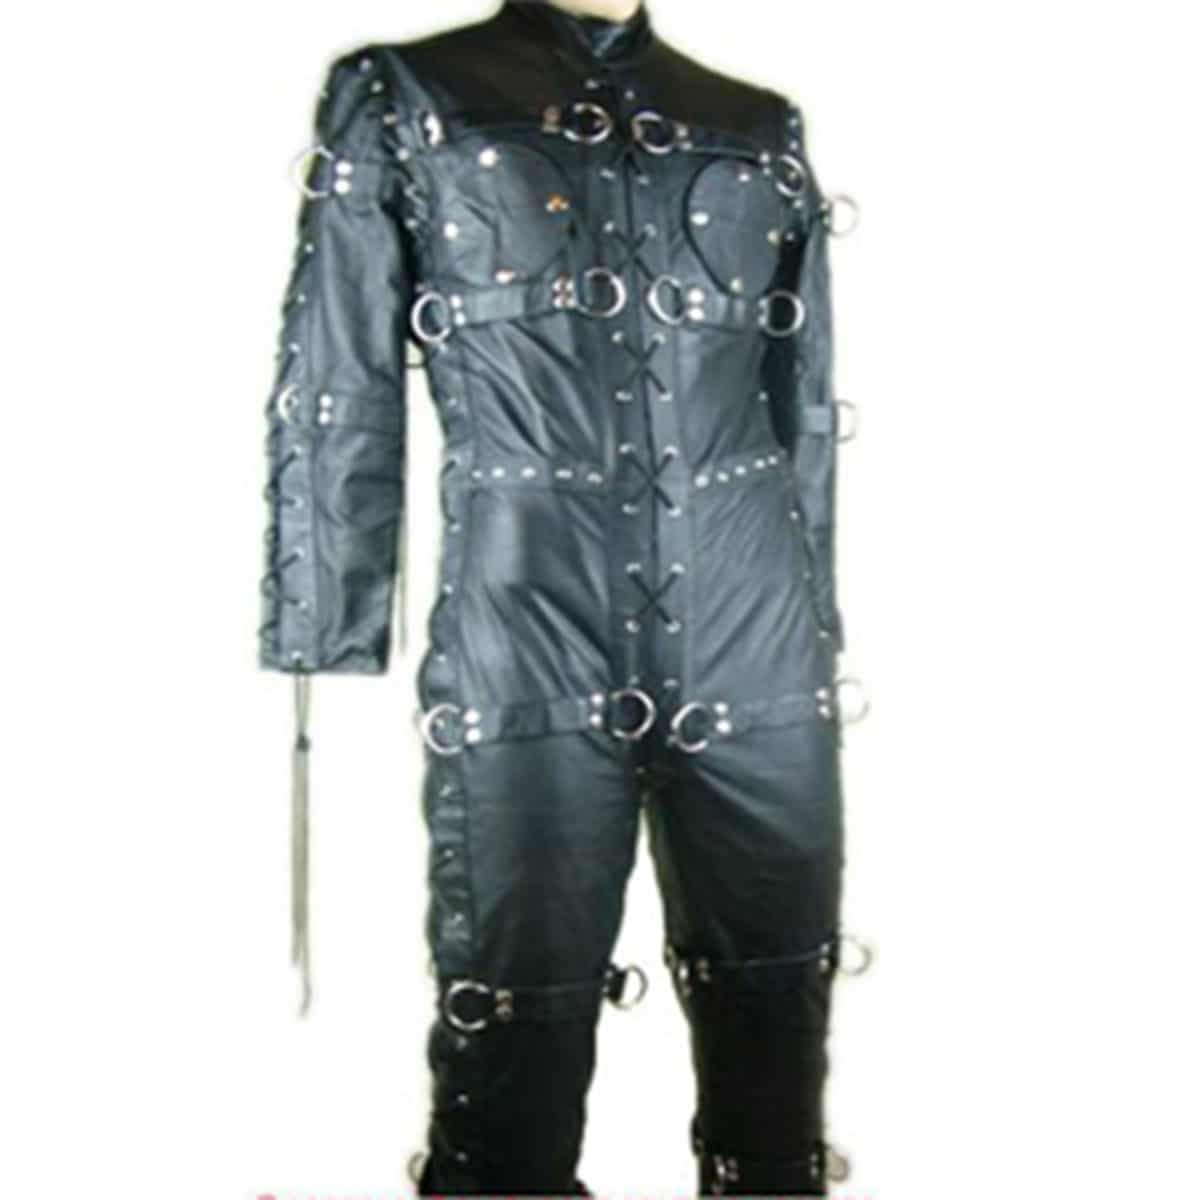 LEATHER Bondage Catsuit with Leather Lining - CELL1